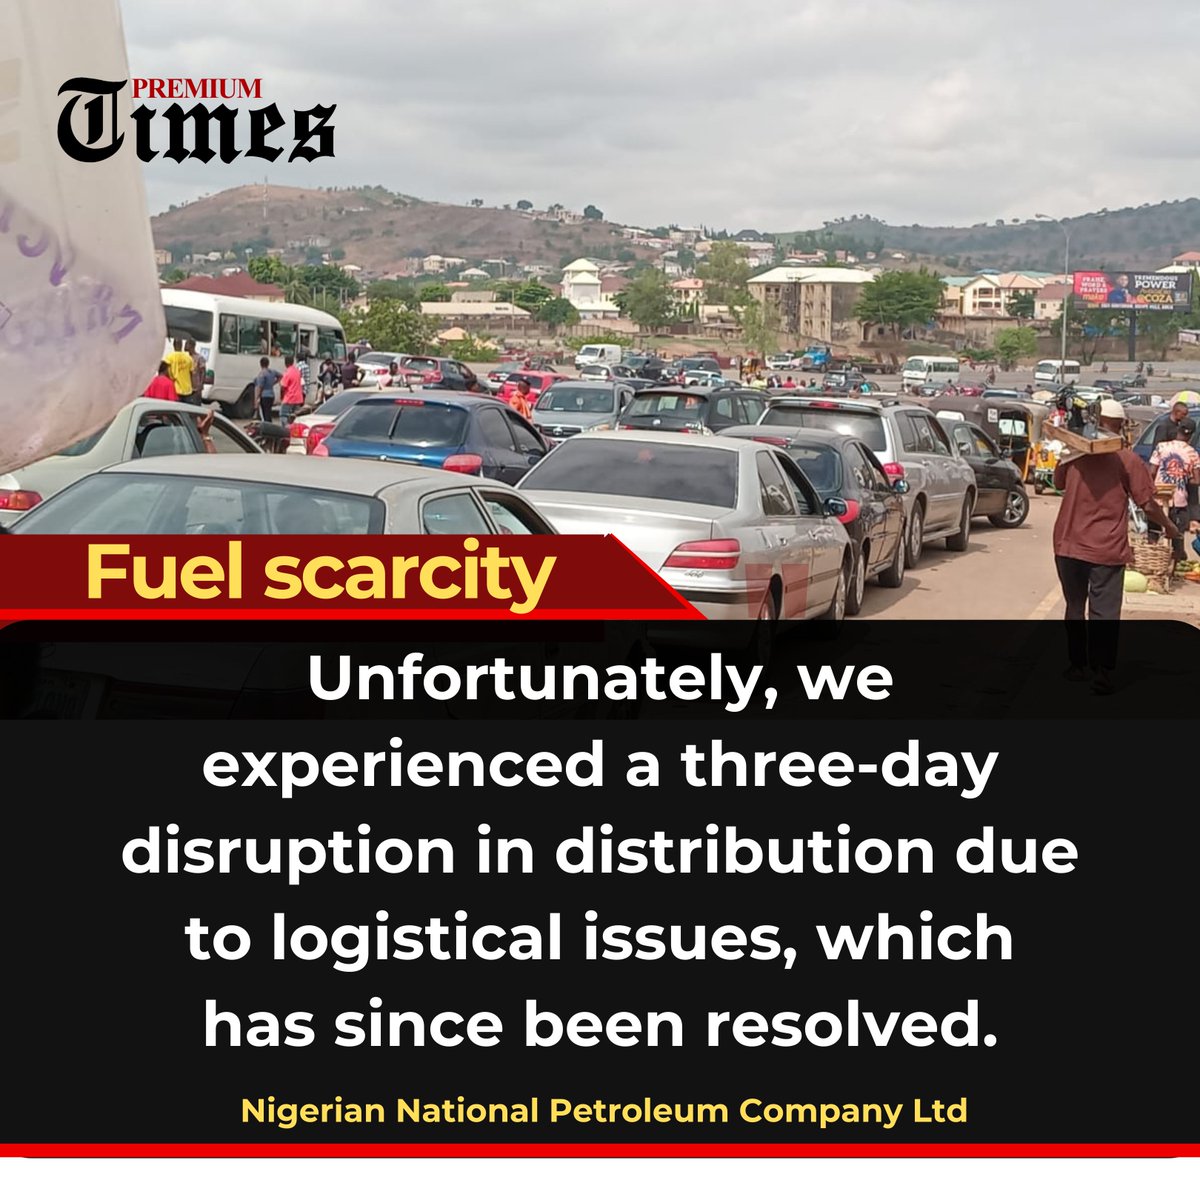 Fuel queues will be cleared by Wednesday across Nigeria – NNPCL snip.ng/kmtTk